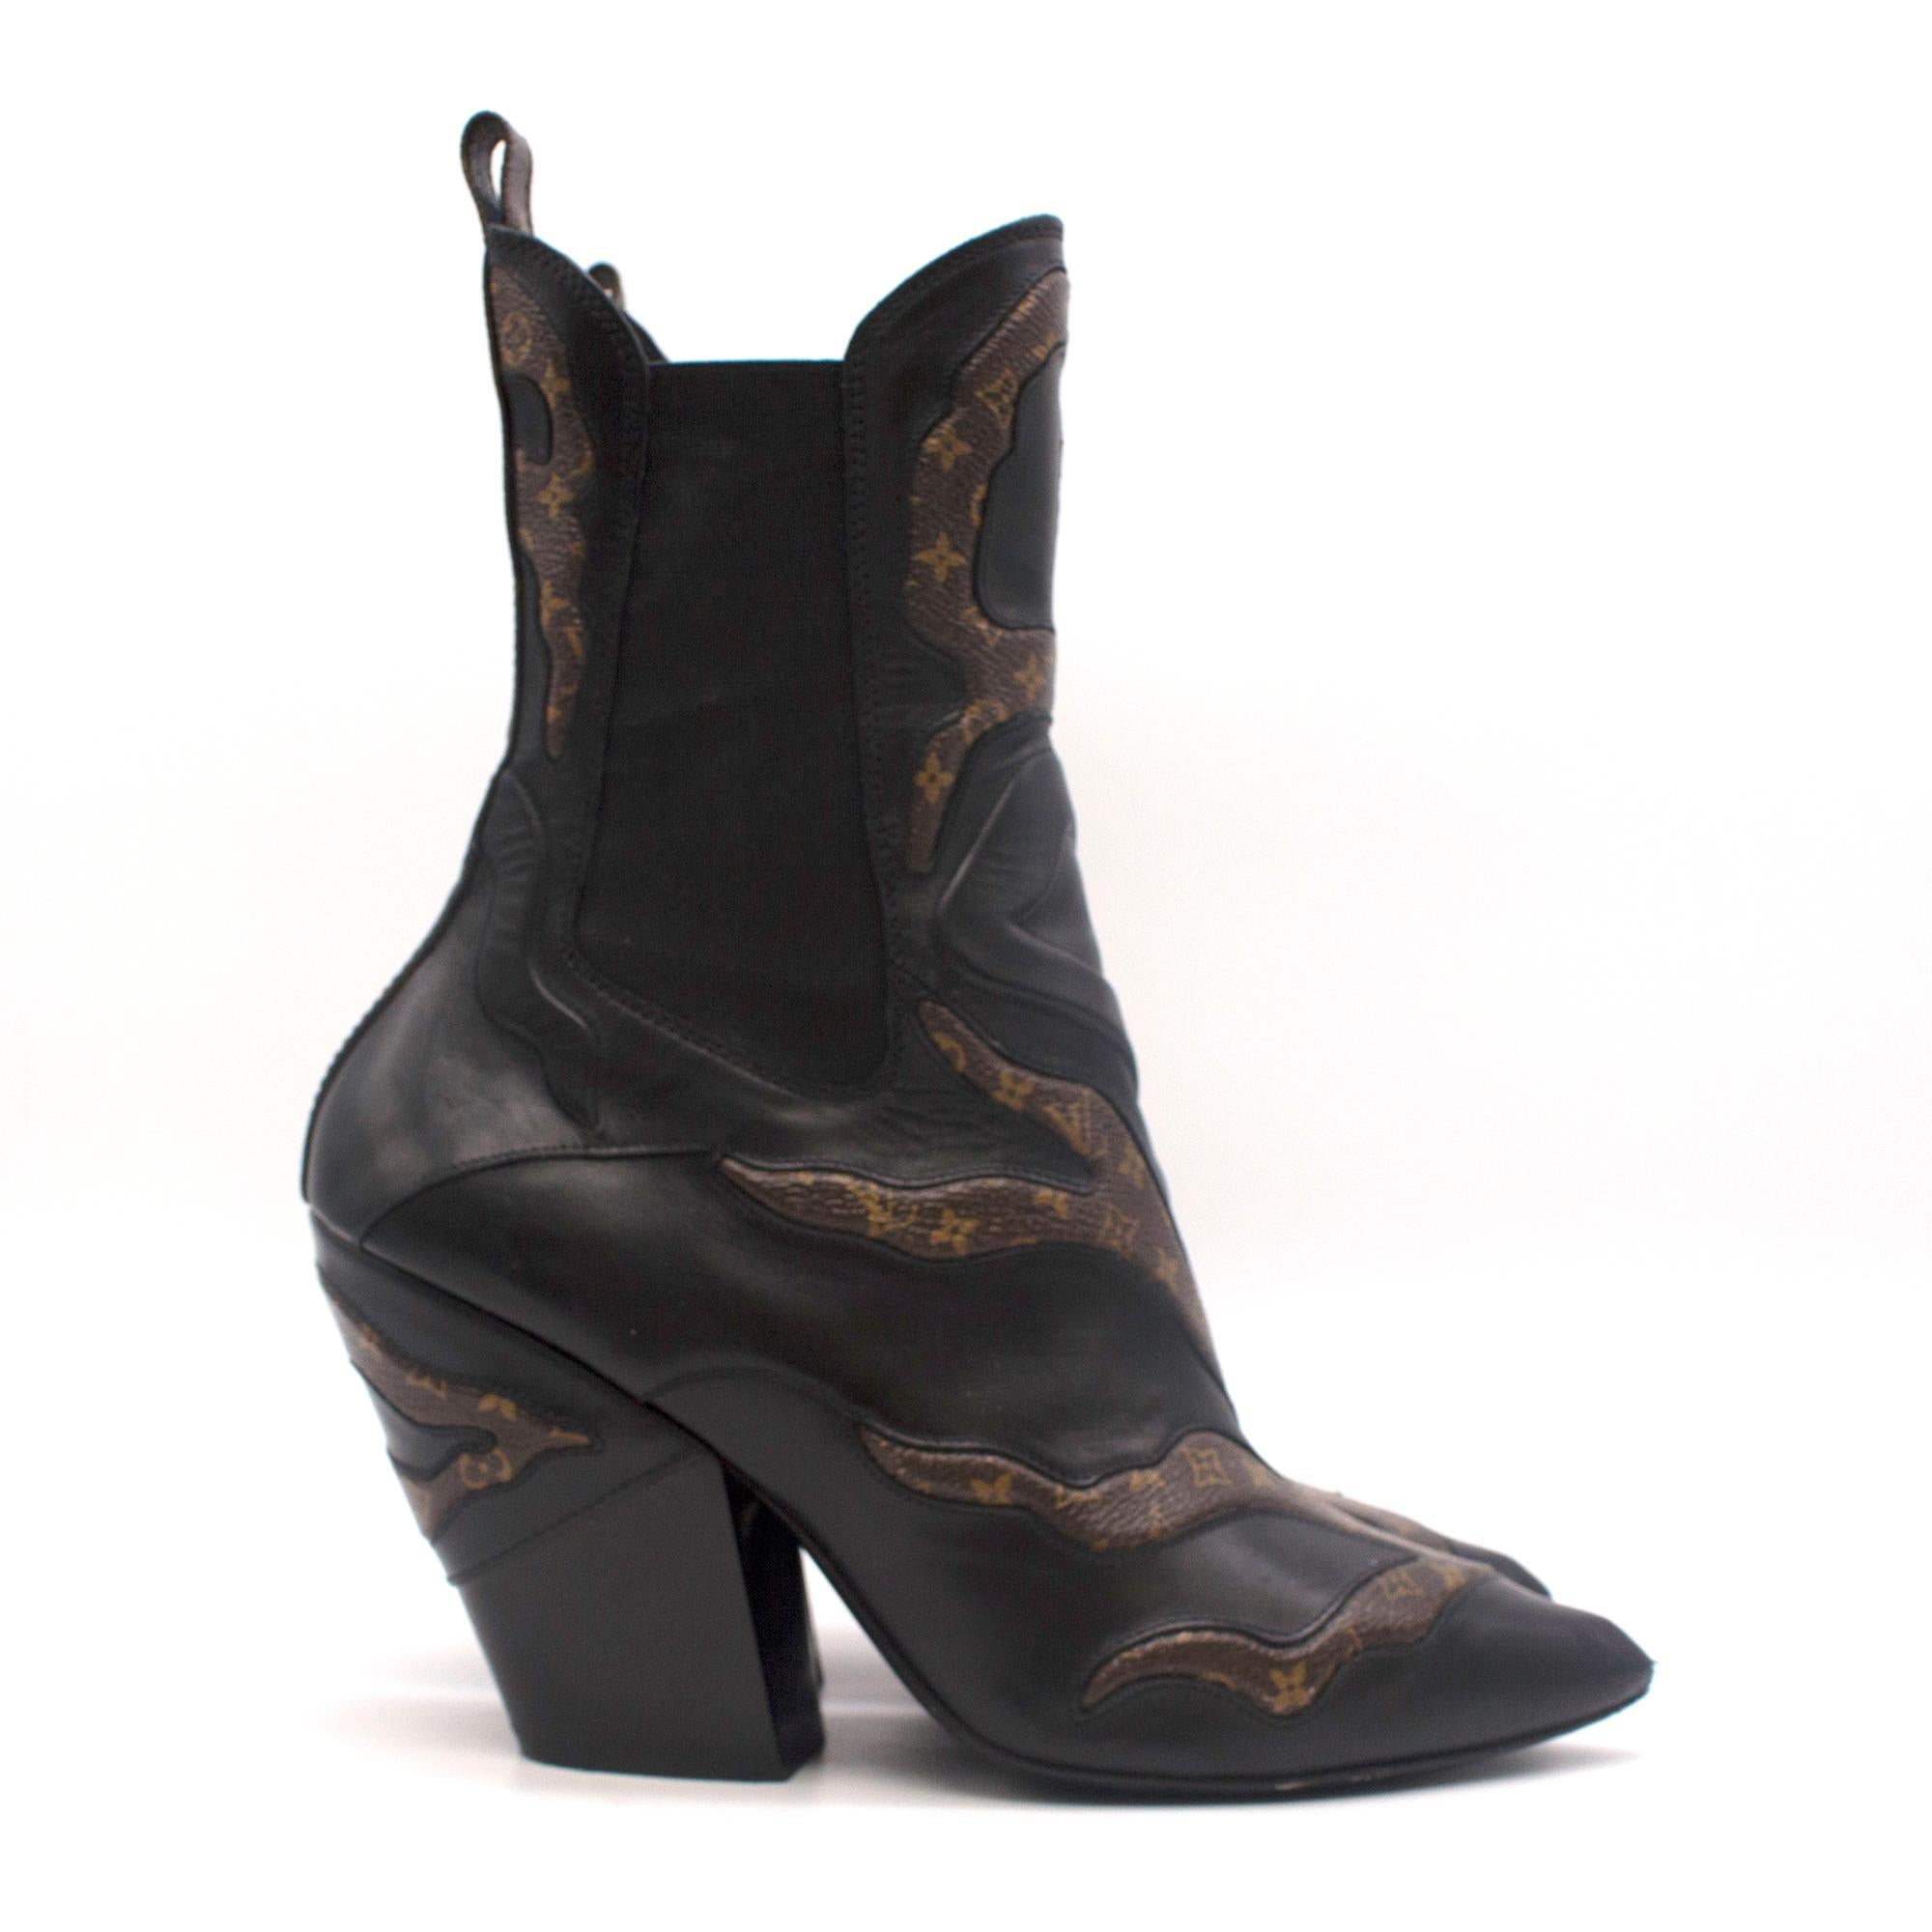 fireball ankle boot